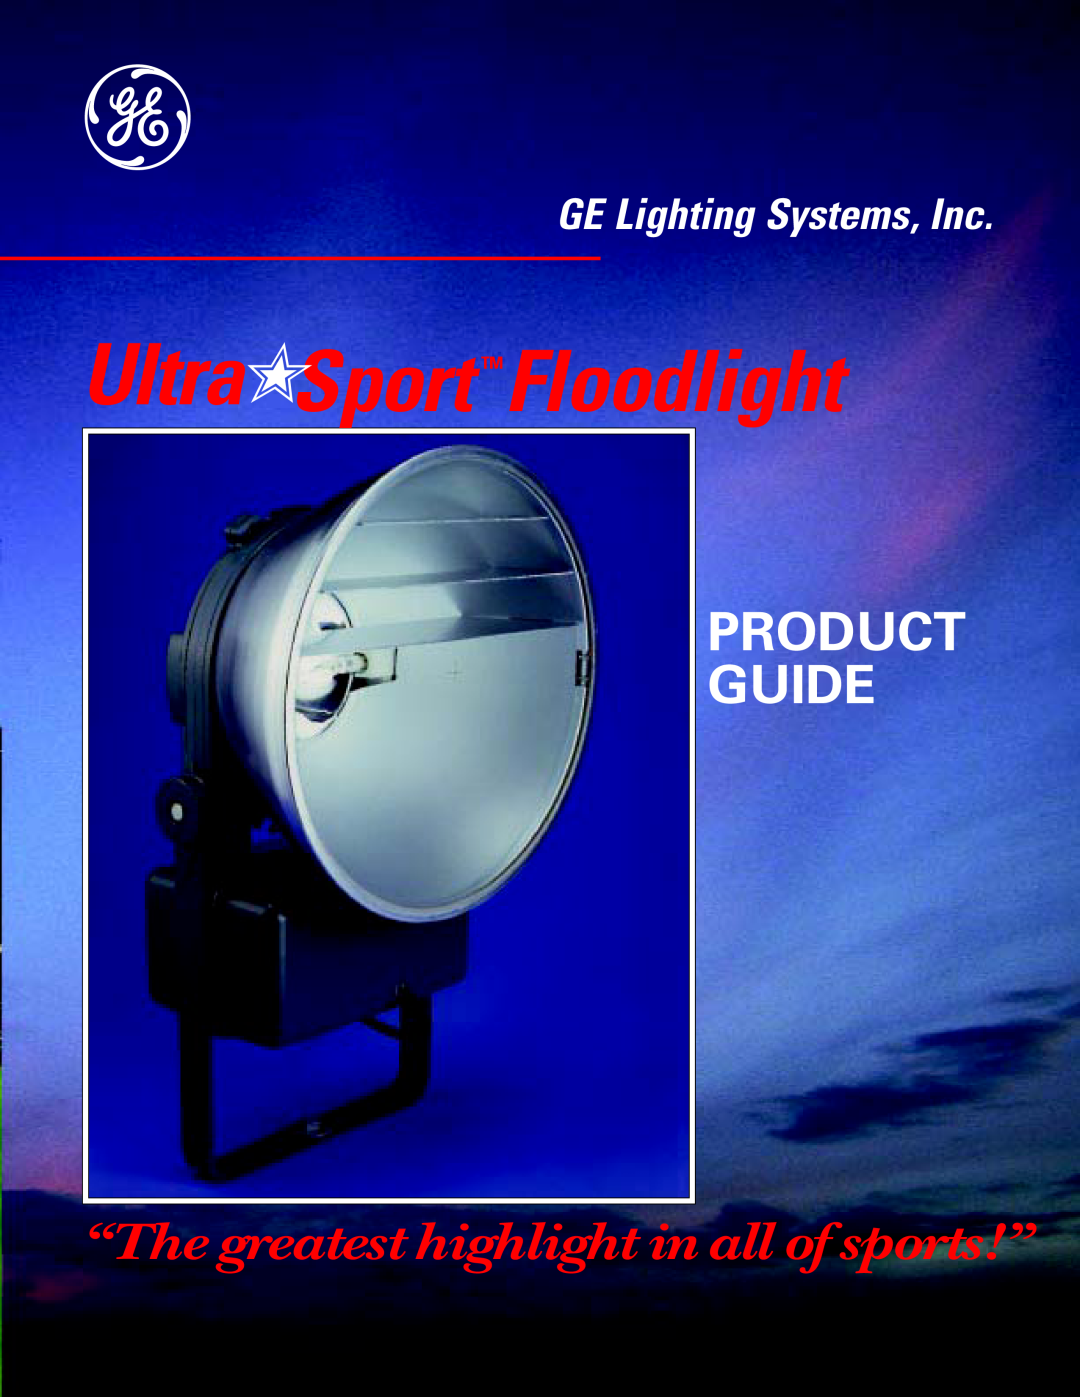 GE manual UltraSport TMFloodlight, GE Lighting Systems, Inc, Product Guide, “The greatest highlight in all of sports!” 